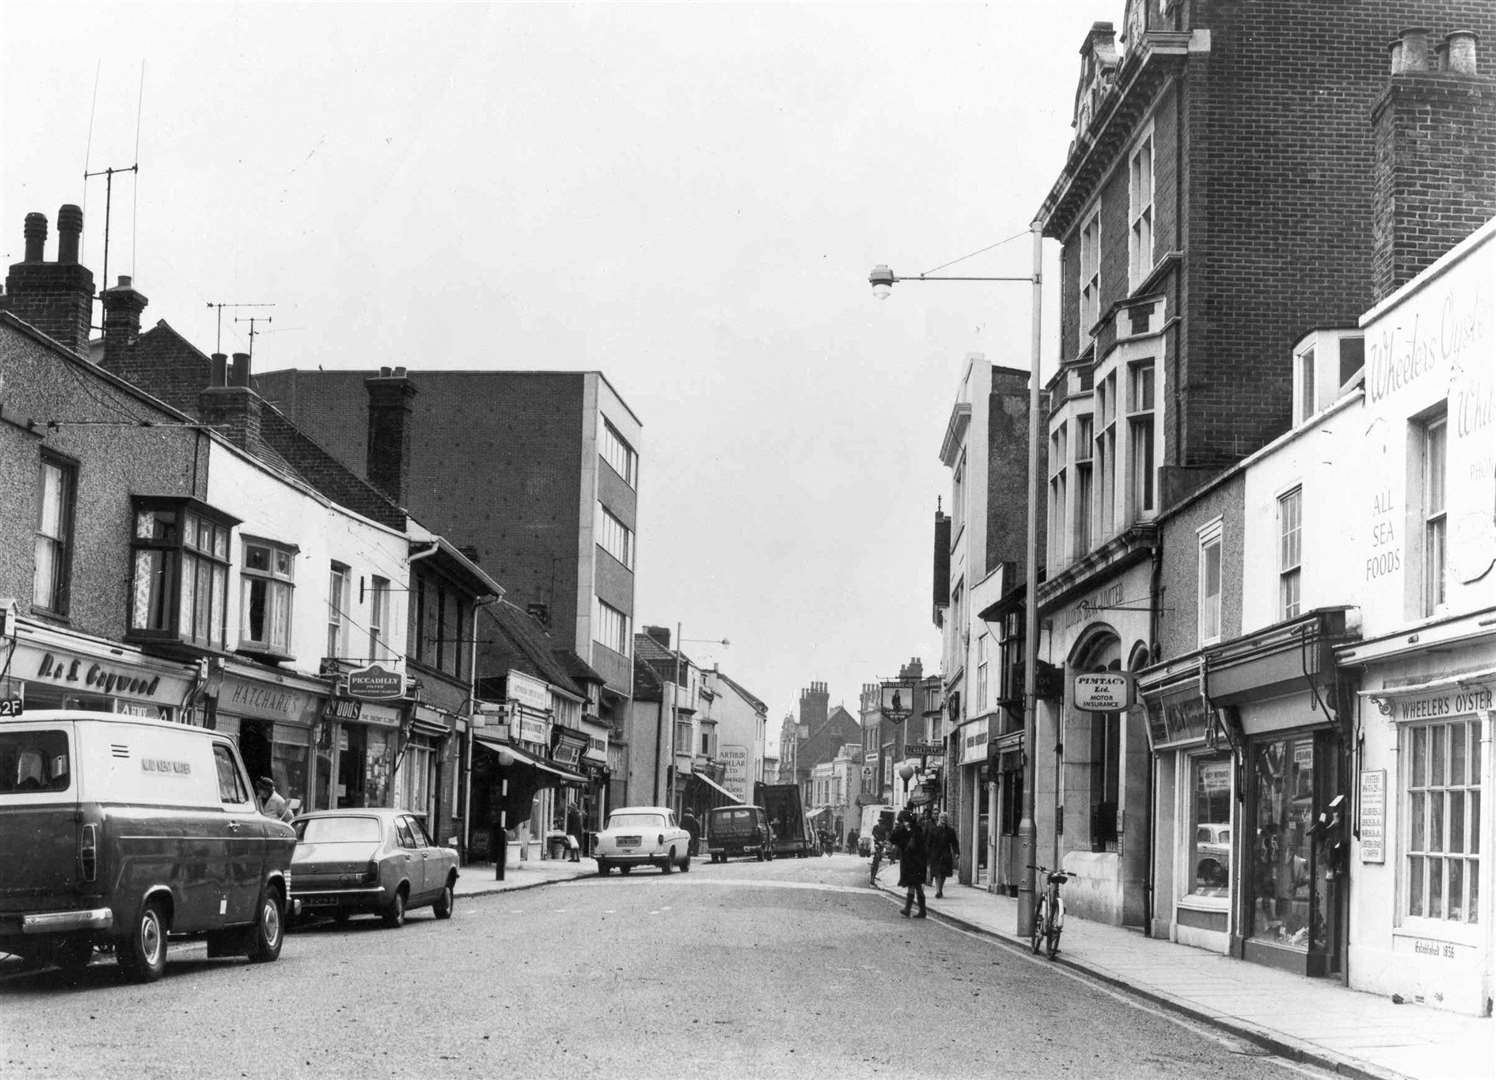 Whitstable high street in 1982. Wheeler's Oyster Bar, on the right, is still there today